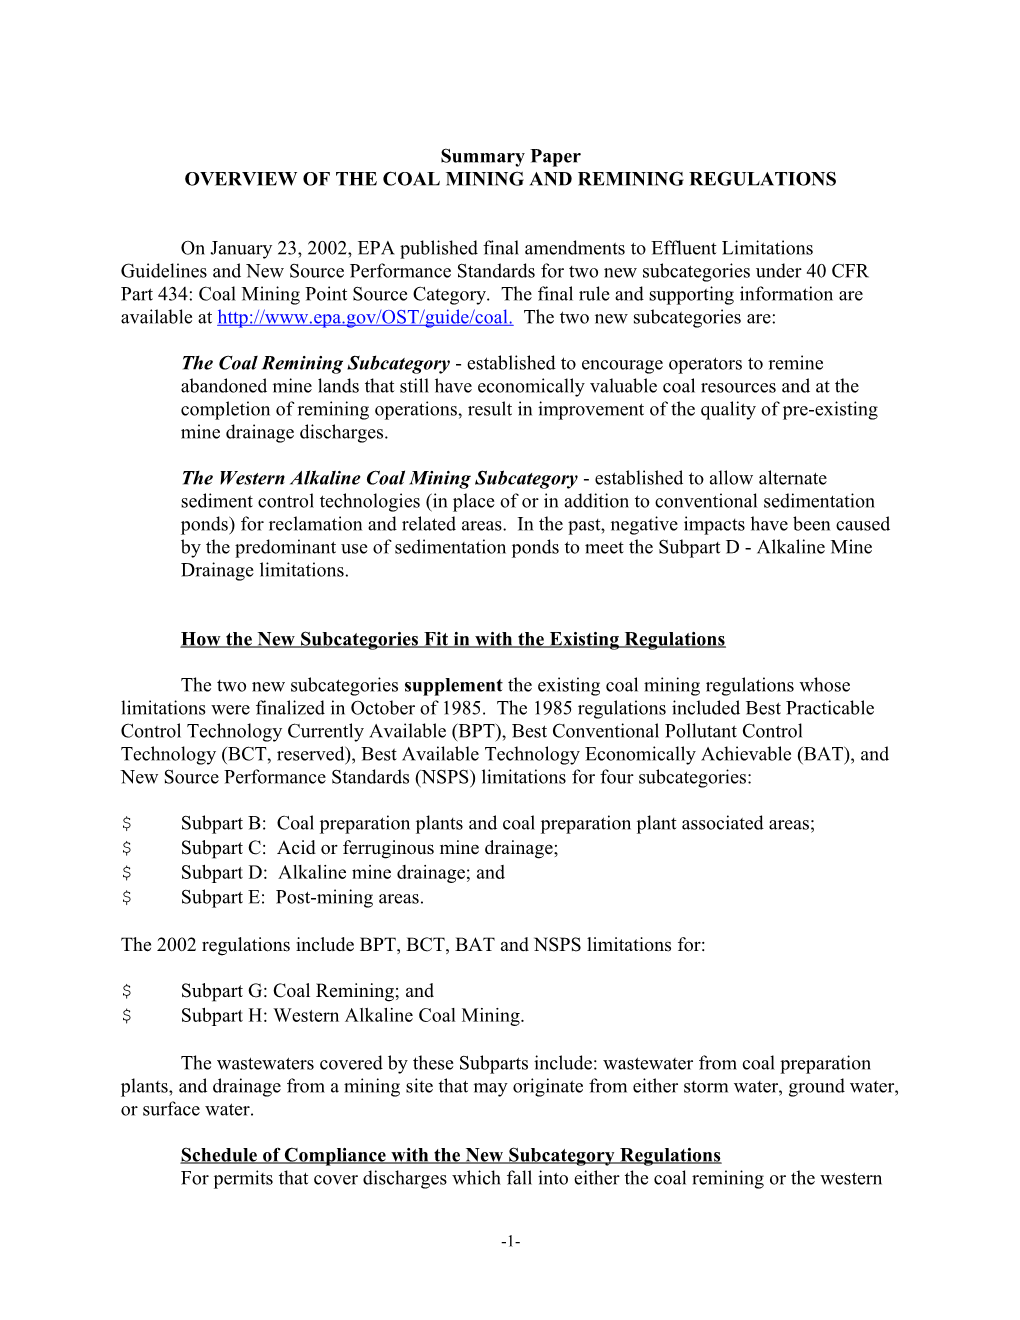 Overview of the Coal Mining and Remining Regulations